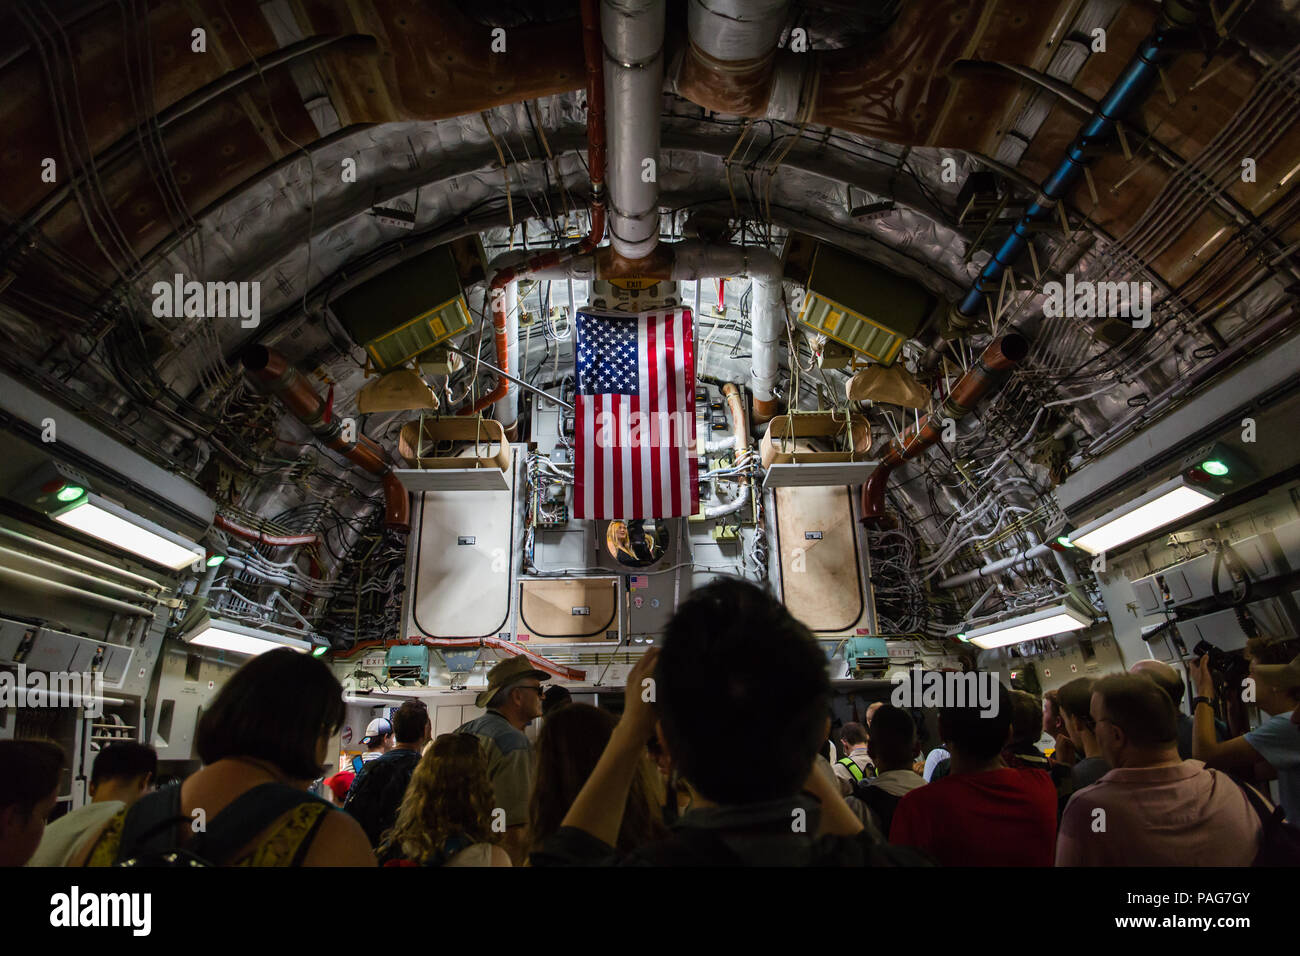 Interior of the Boeing C-17 Globemaster III large military transport aircraft display in the Farnborough Airshow 2018. Stock Photo